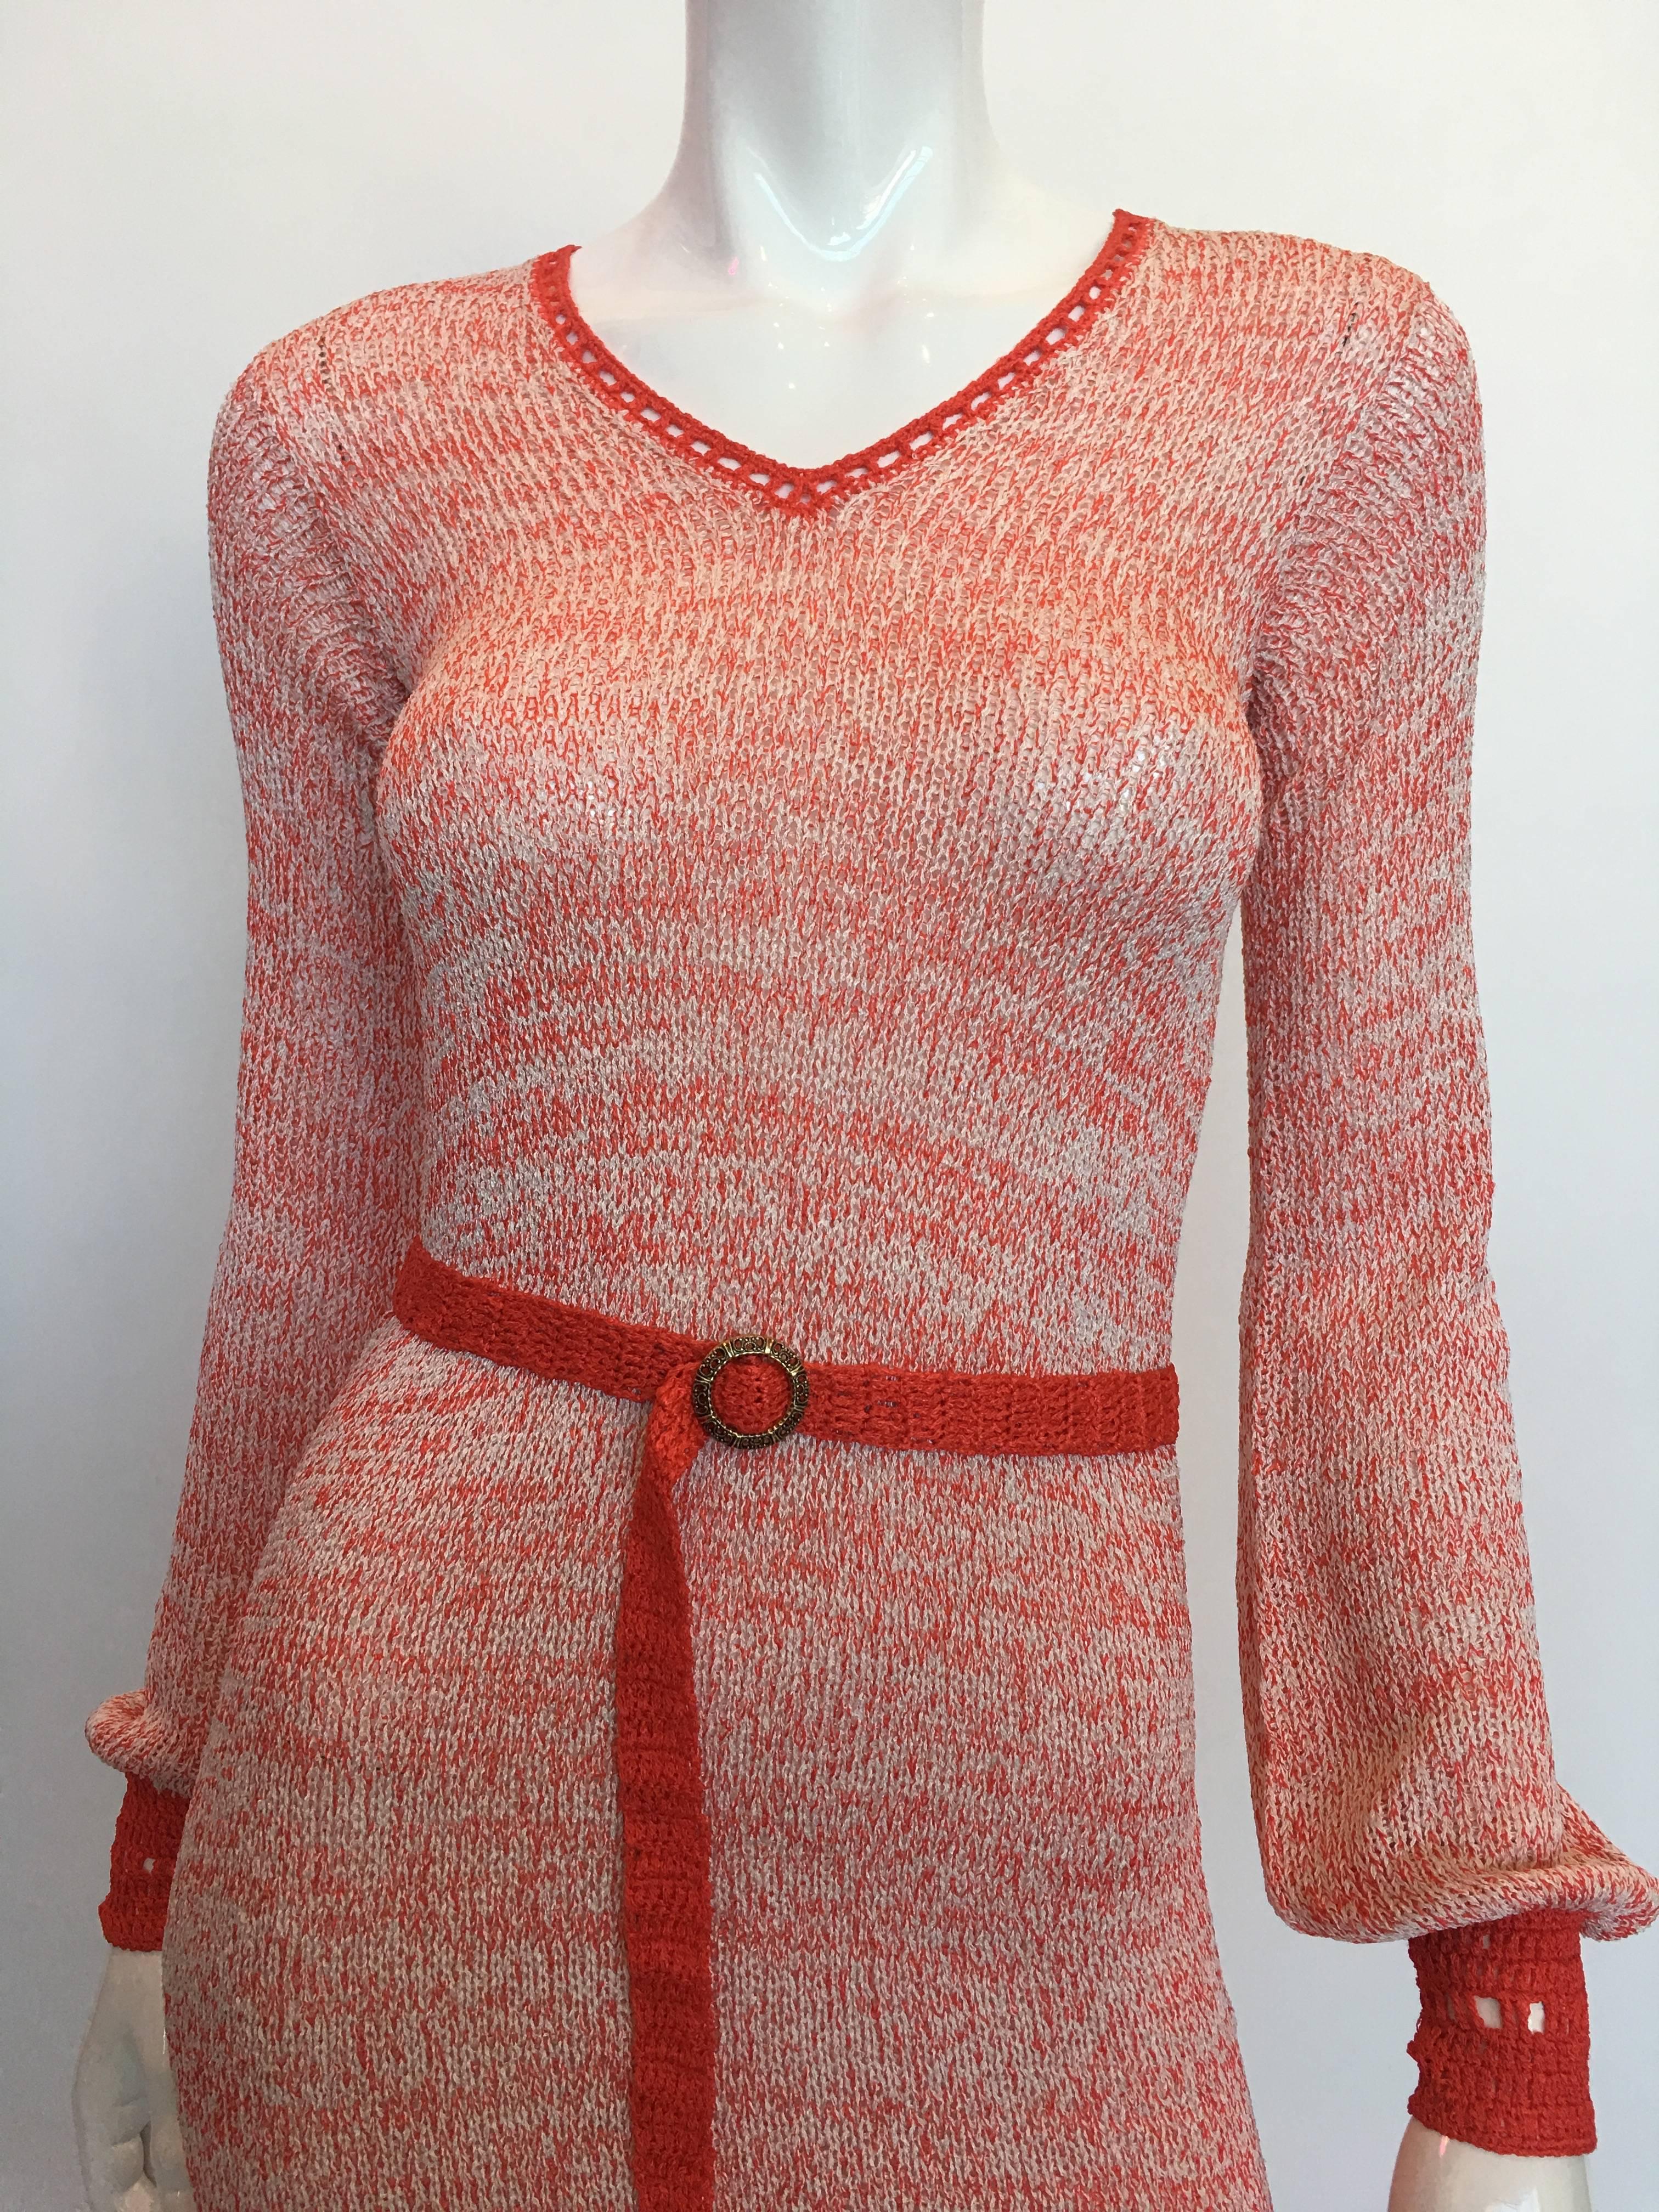 1970s Helga Howie Knit Red/White Space Dye Dress

Made in USA
Size label N/A

All measurements taken flat:
*This item has STRETCH.

Shoulders - seam to seam: 15